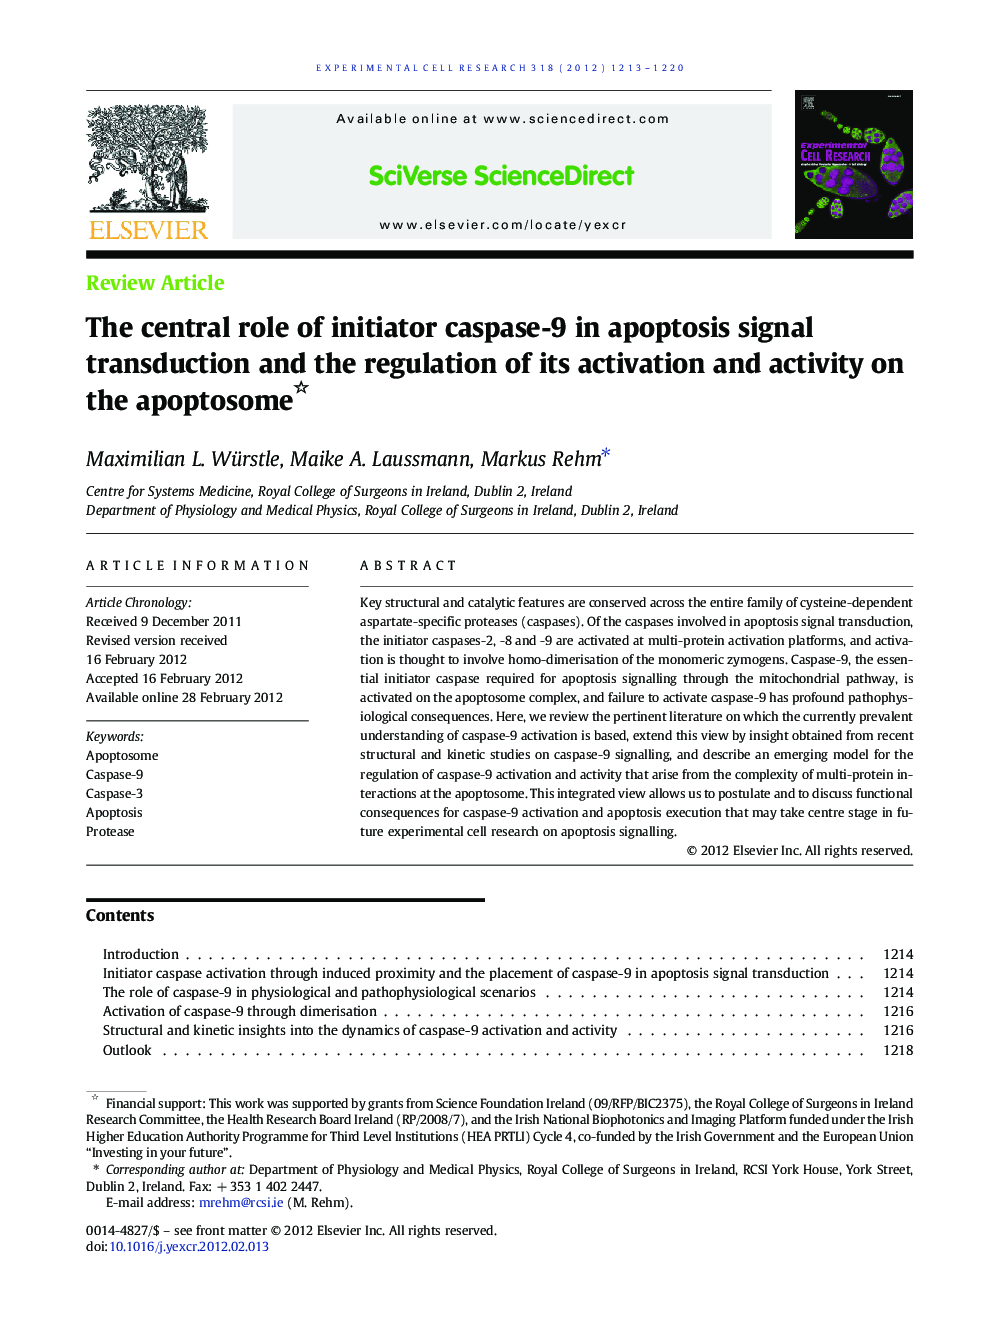 The central role of initiator caspase-9 in apoptosis signal transduction and the regulation of its activation and activity on the apoptosome